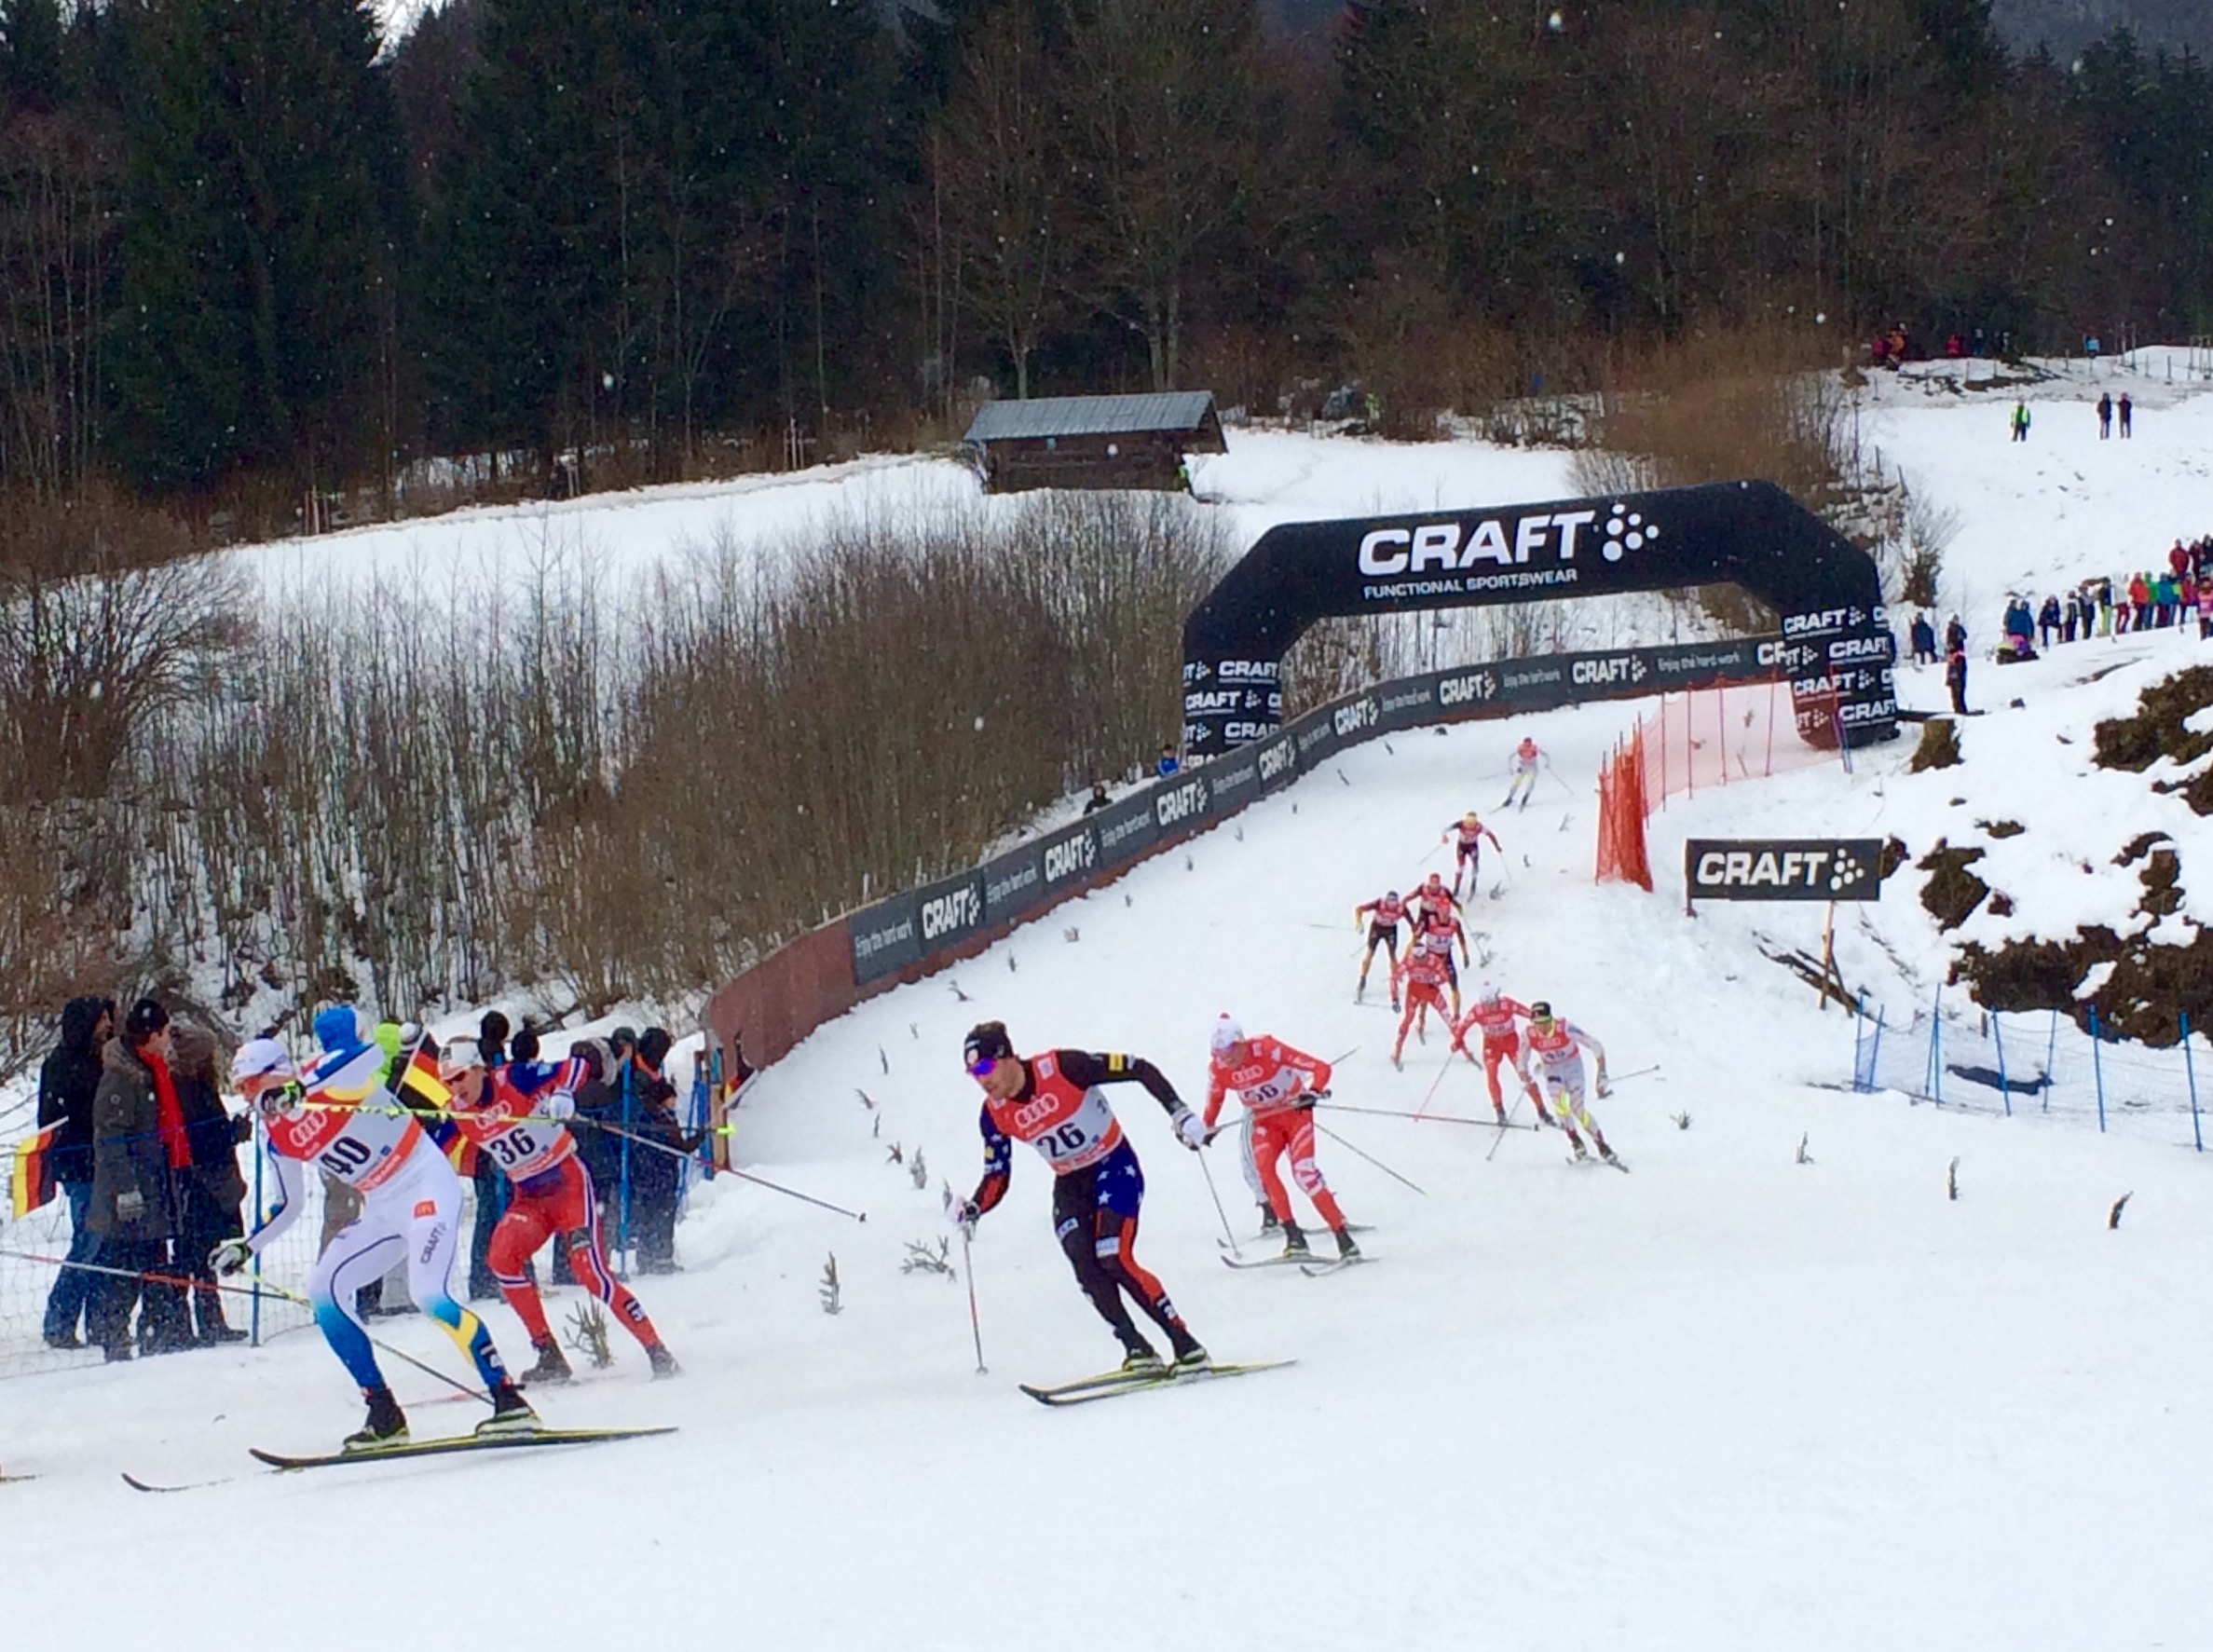 American Men Have Disappointing Day in Oberstdorf, Finish Out of Points